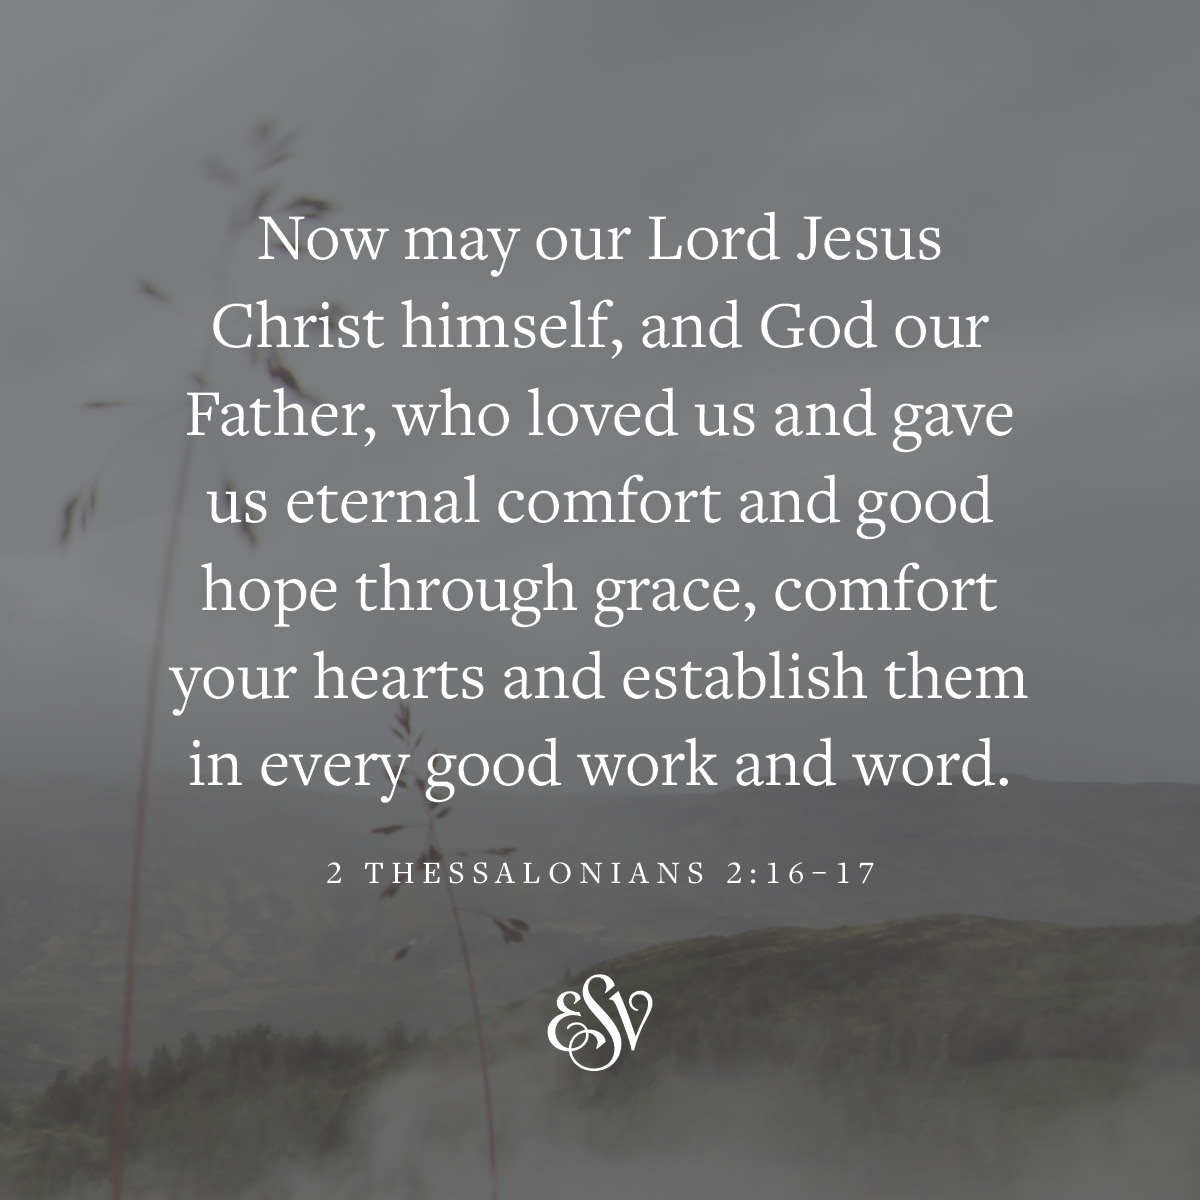 Now may our Lord Jesus Christ himself and God our Father, who loved us and gave us eternal comfort and good hope through grace, comfort your hearts and establish them in every good work and word. 
—2 Thessalonians 2:16-17 ESV.org

#Verseoftheday #ESV #Bible